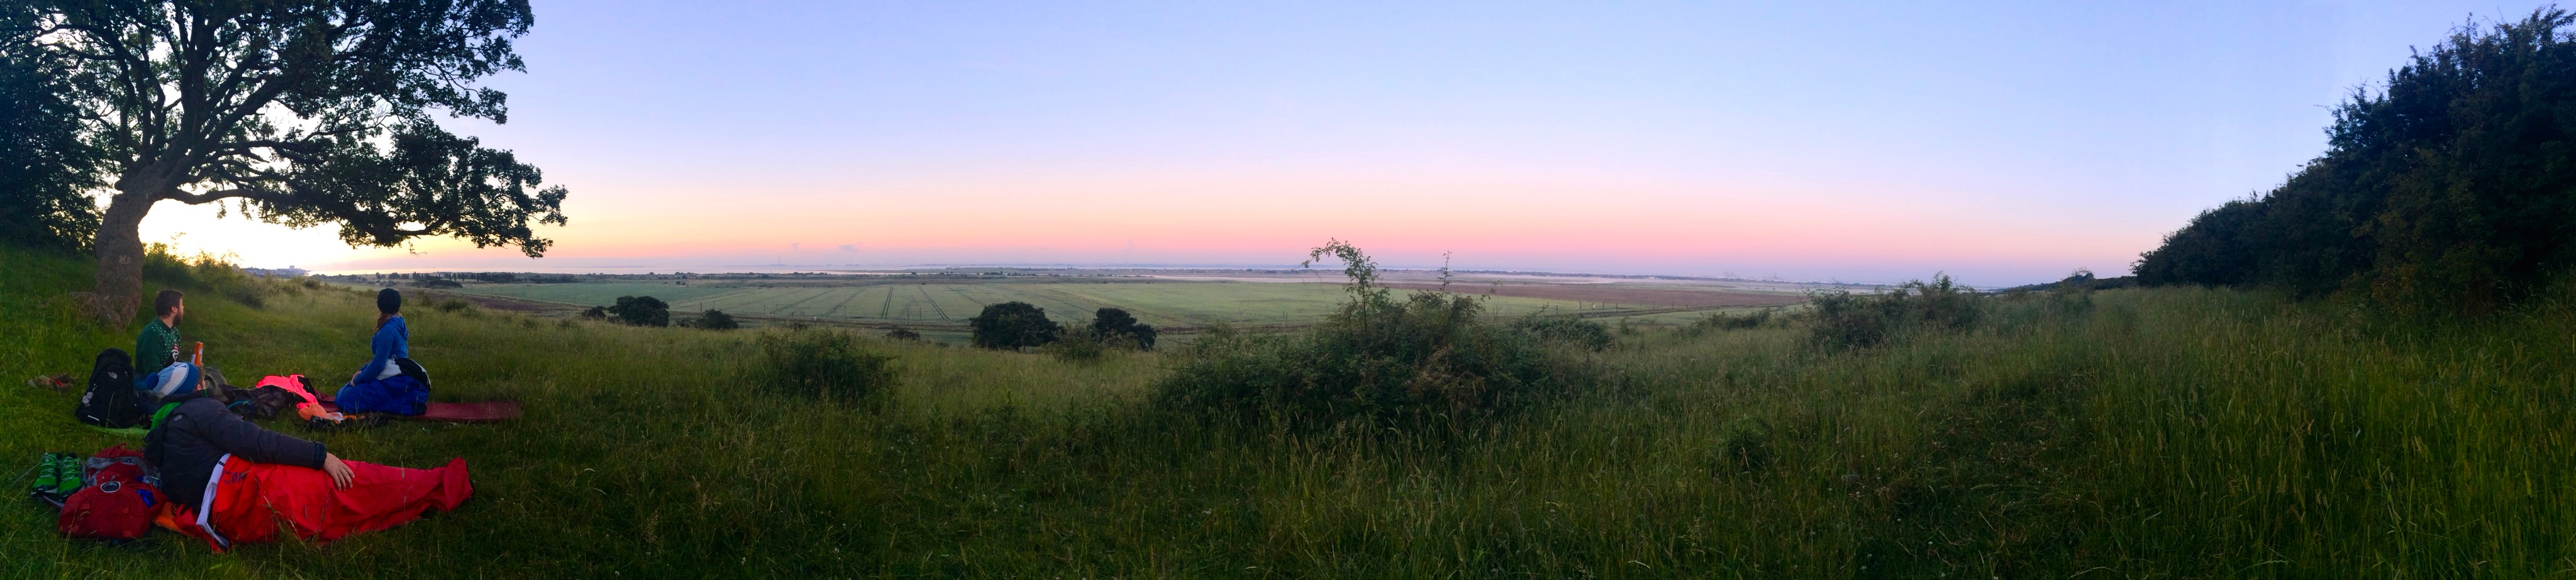 4am in the morning - our Hadleigh hilltop heaven